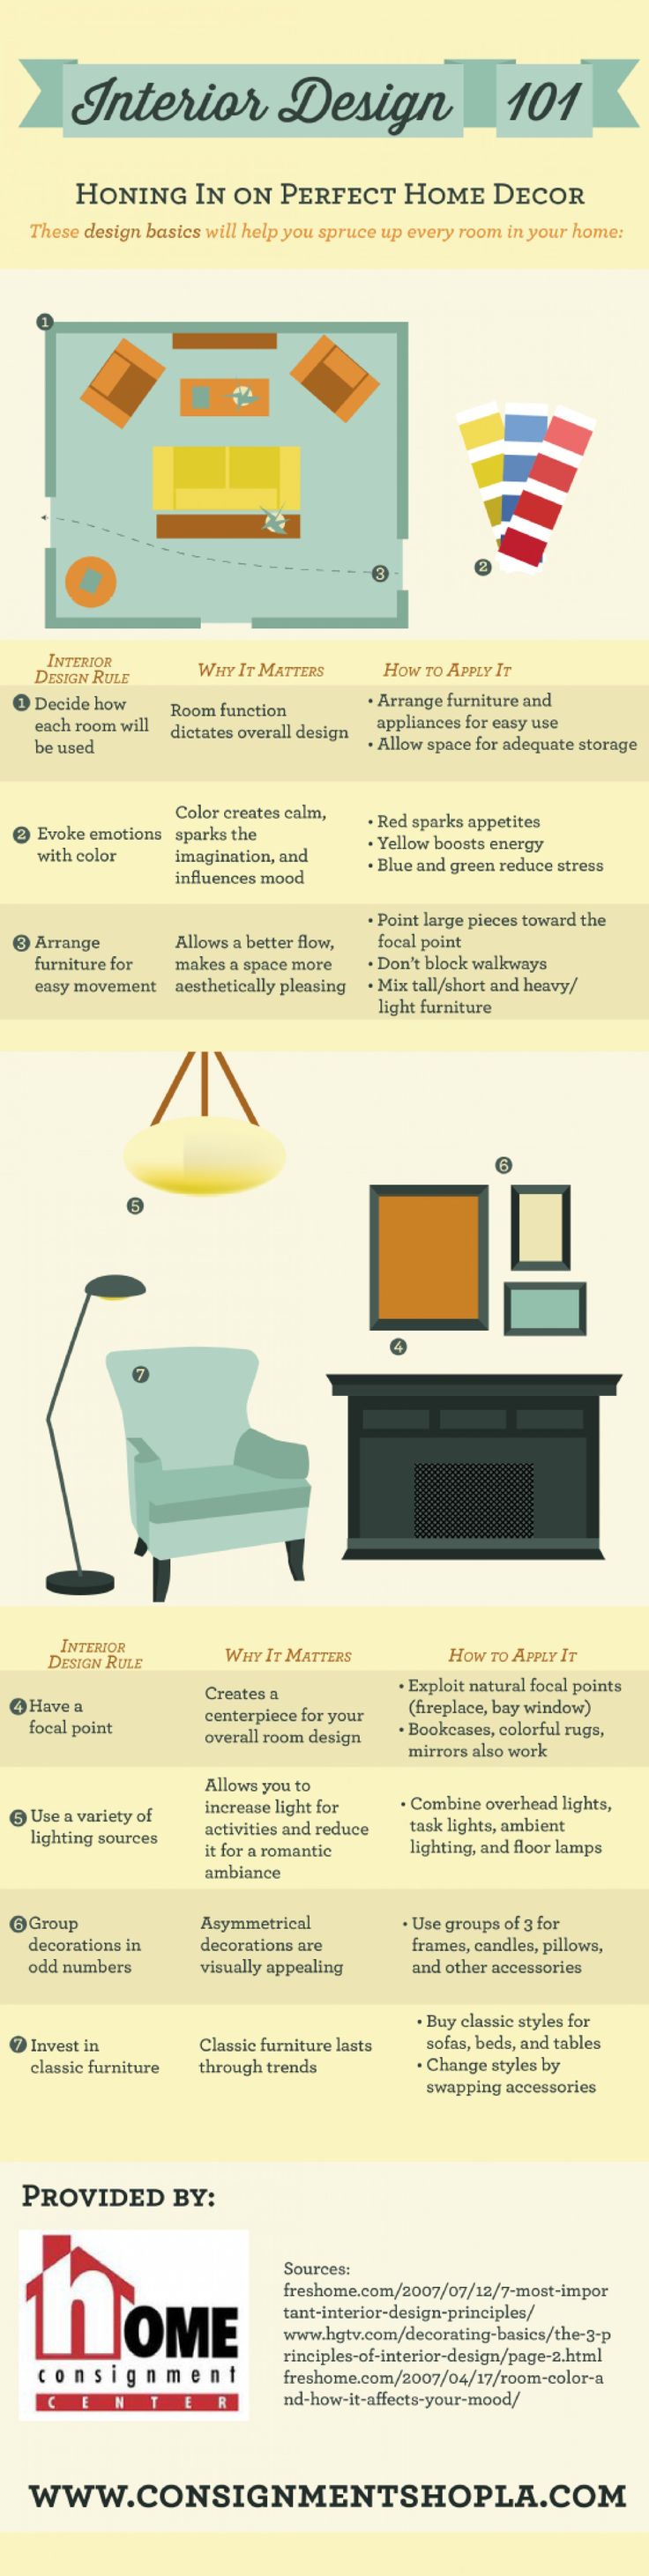 Interior Design 101: Honing In on the Perfect Home Decor Infographic